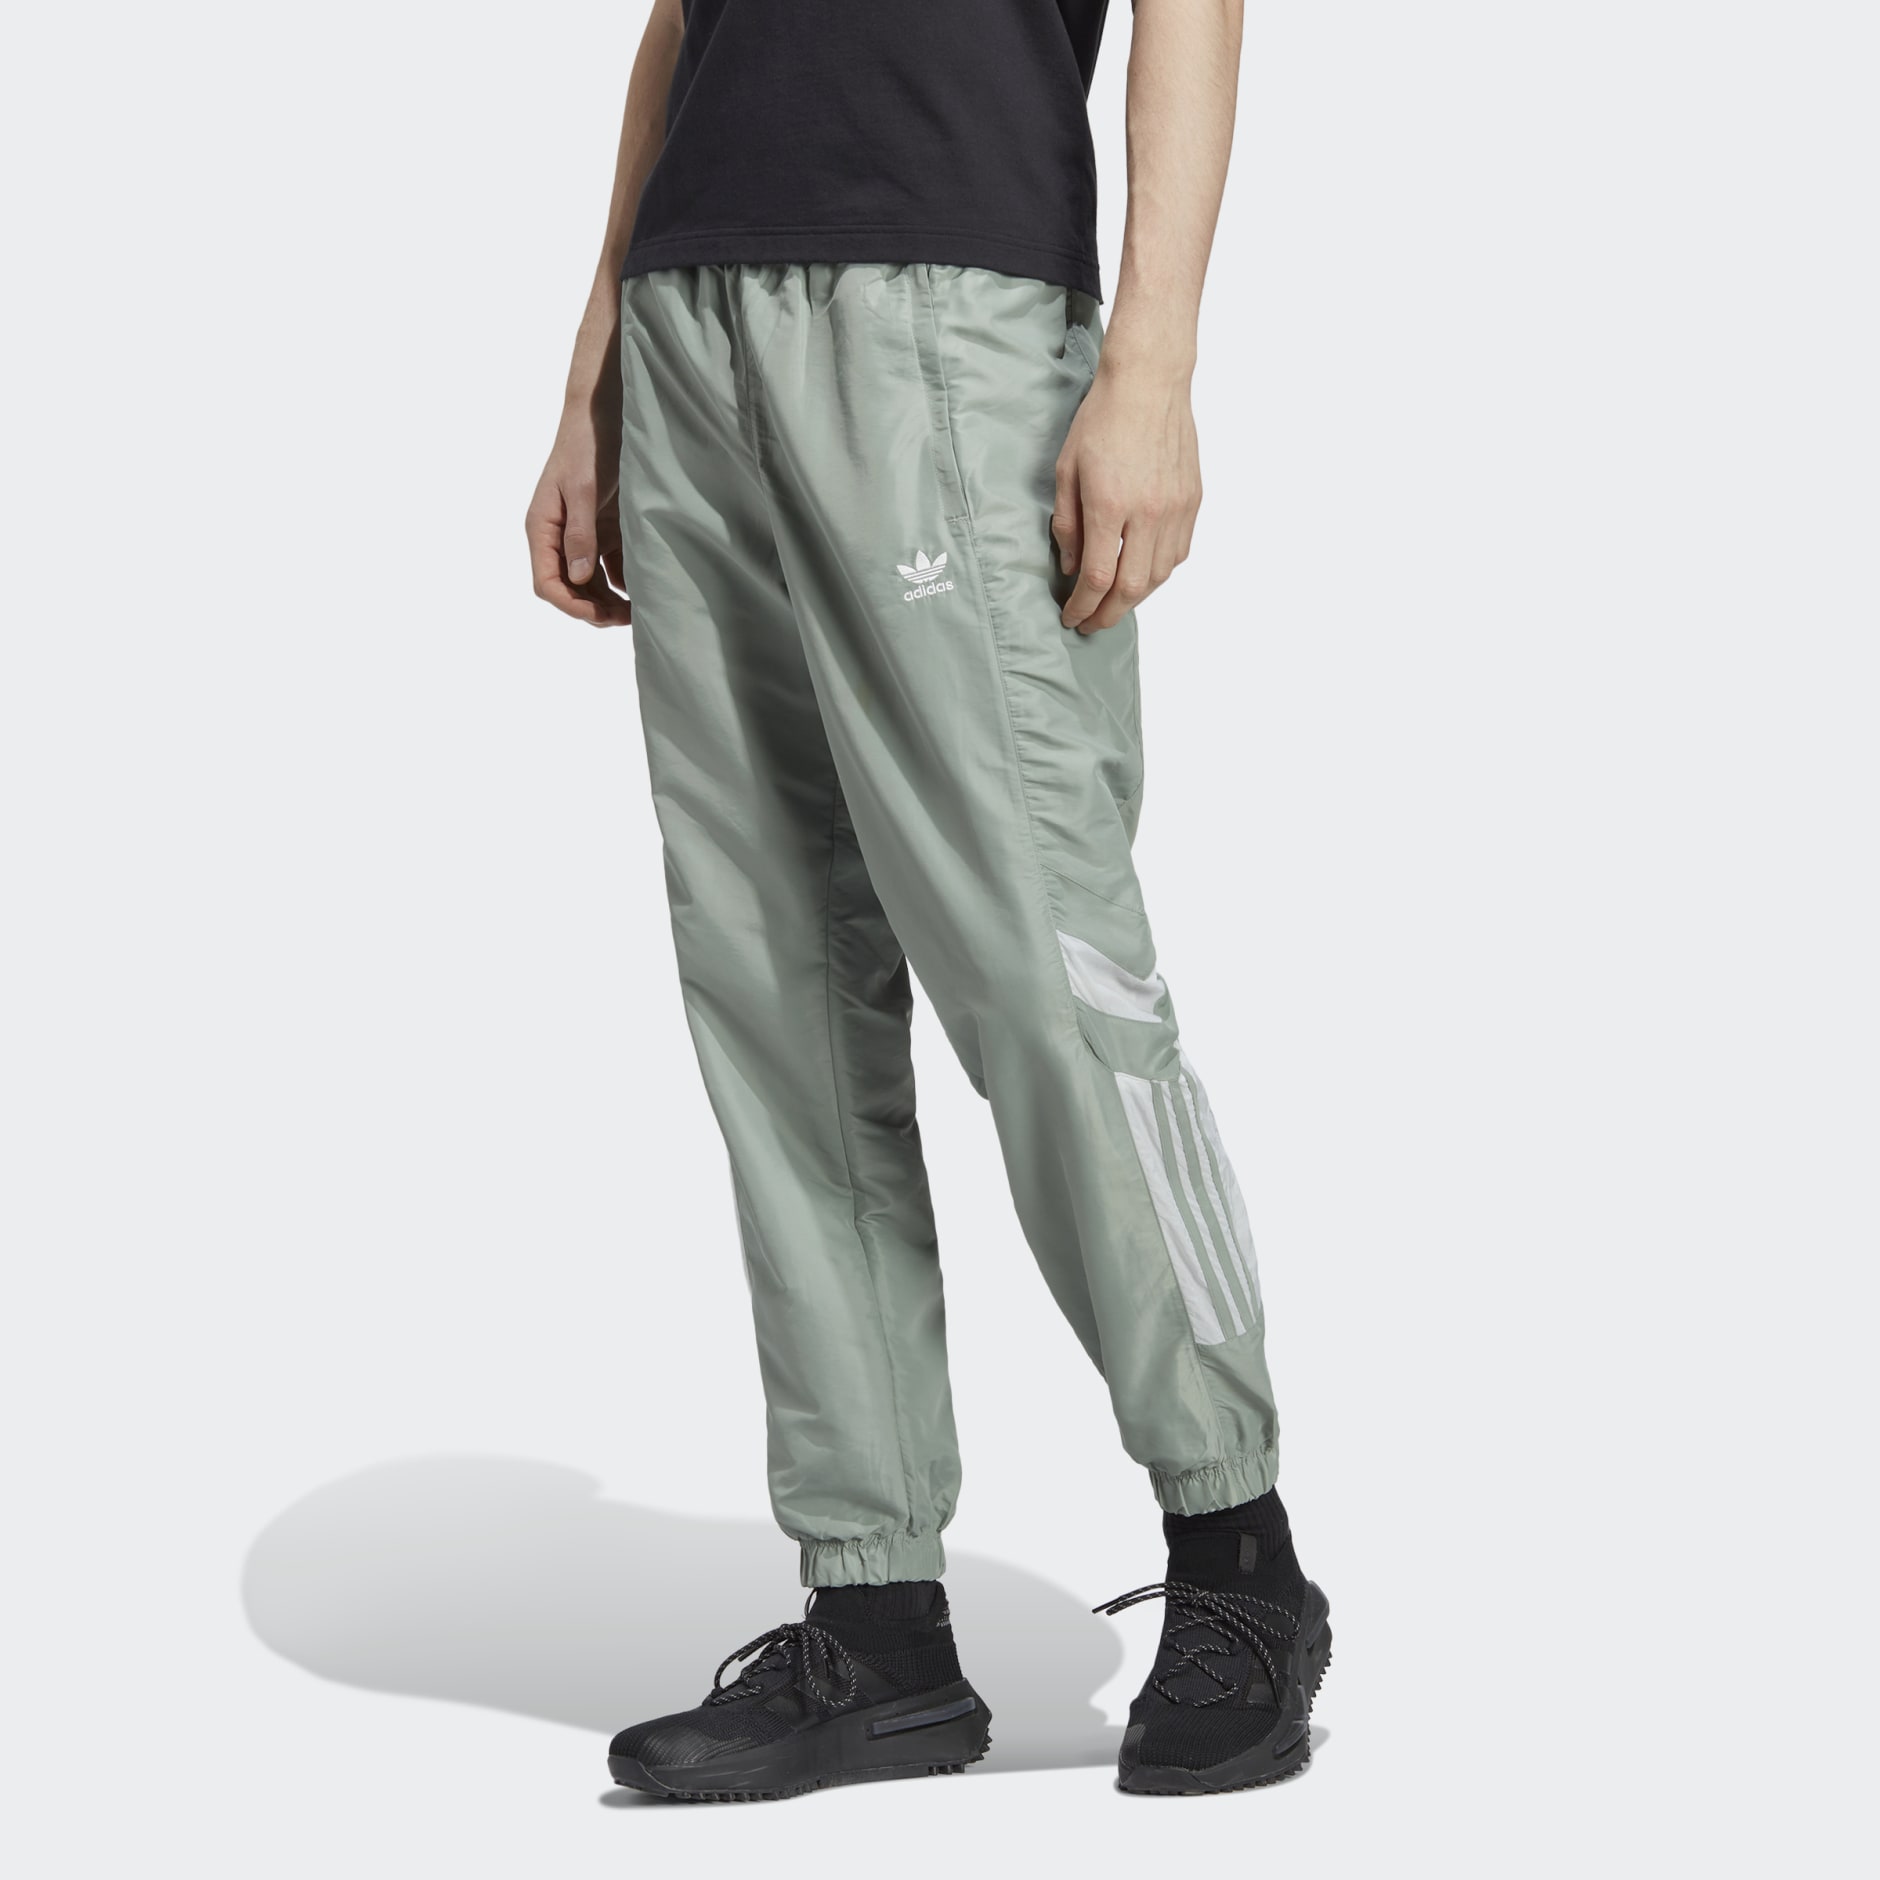 PUMA Woven Pants CH Solid Men Grey Track Pants - Buy PUMA Woven Pants CH  Solid Men Grey Track Pants Online at Best Prices in India | Flipkart.com